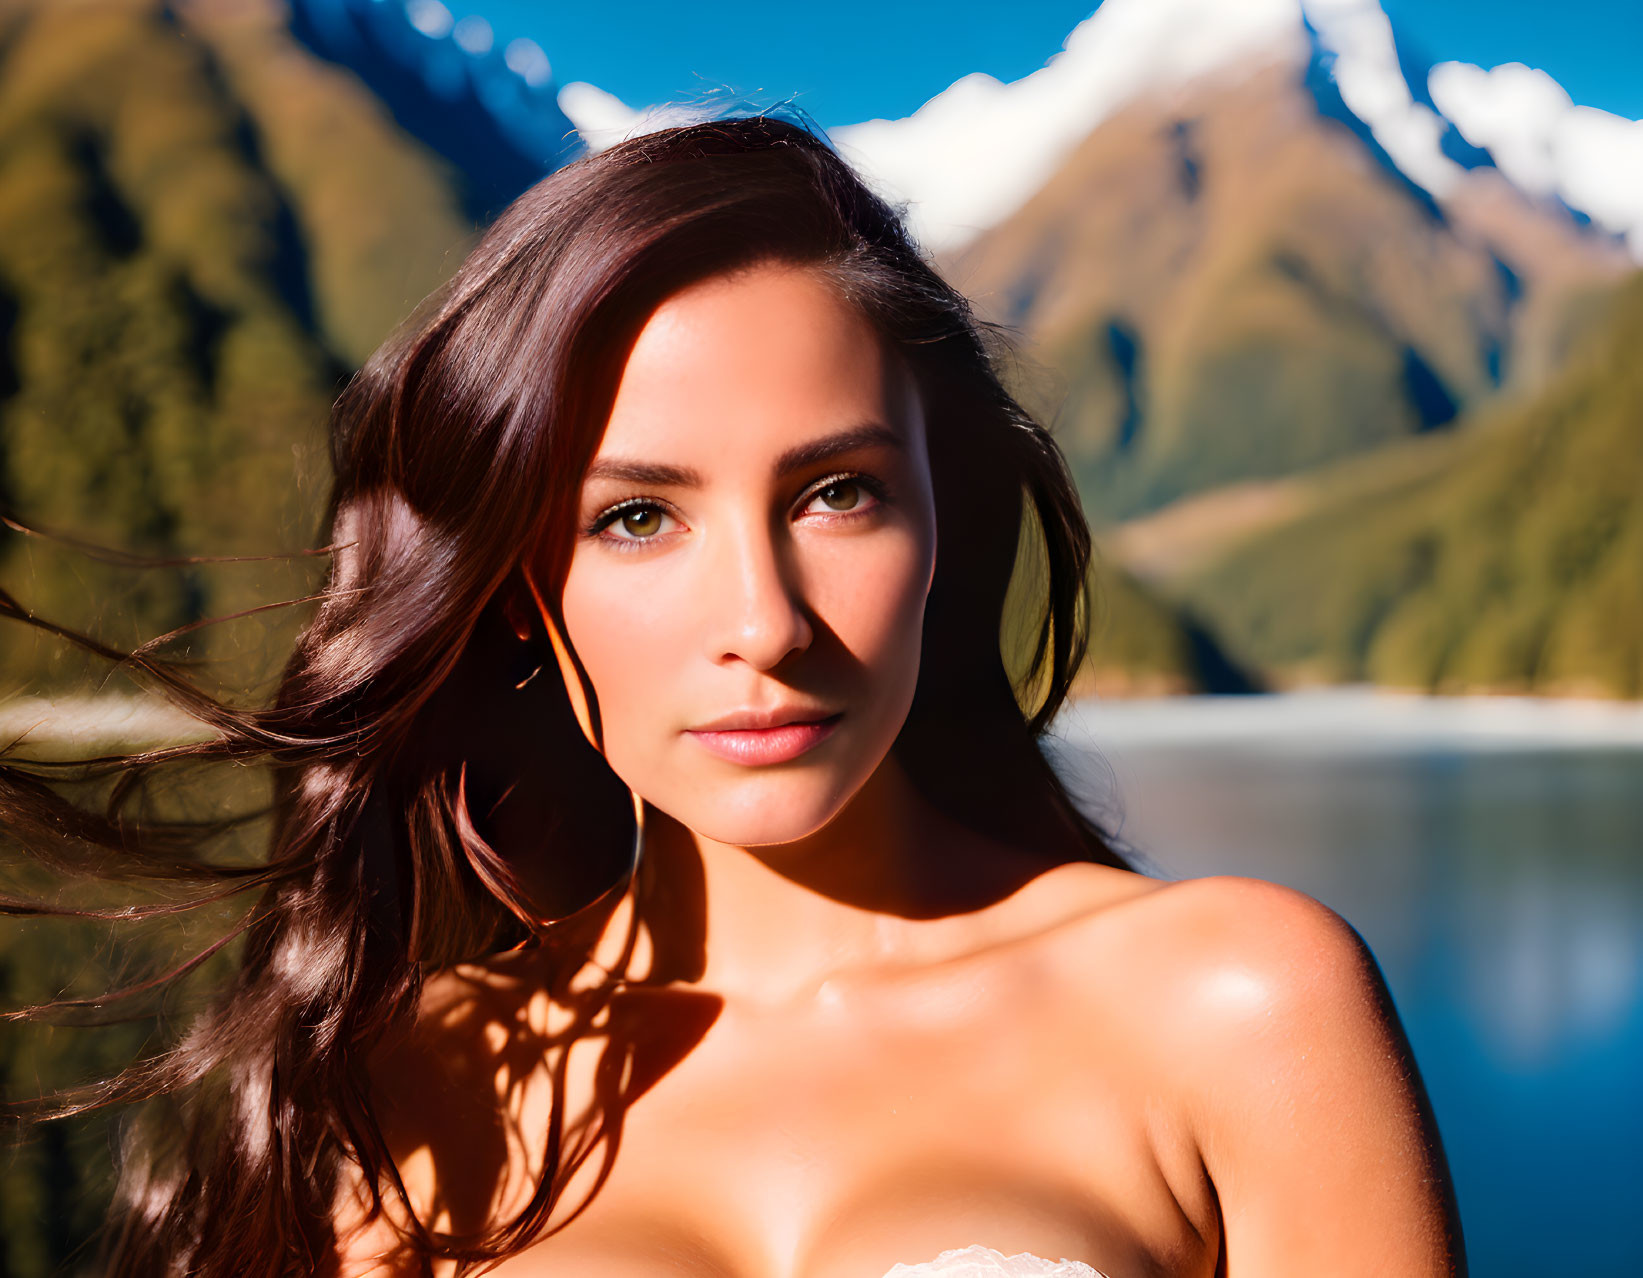 A beautiful girl in Fiordland National Park in NZ